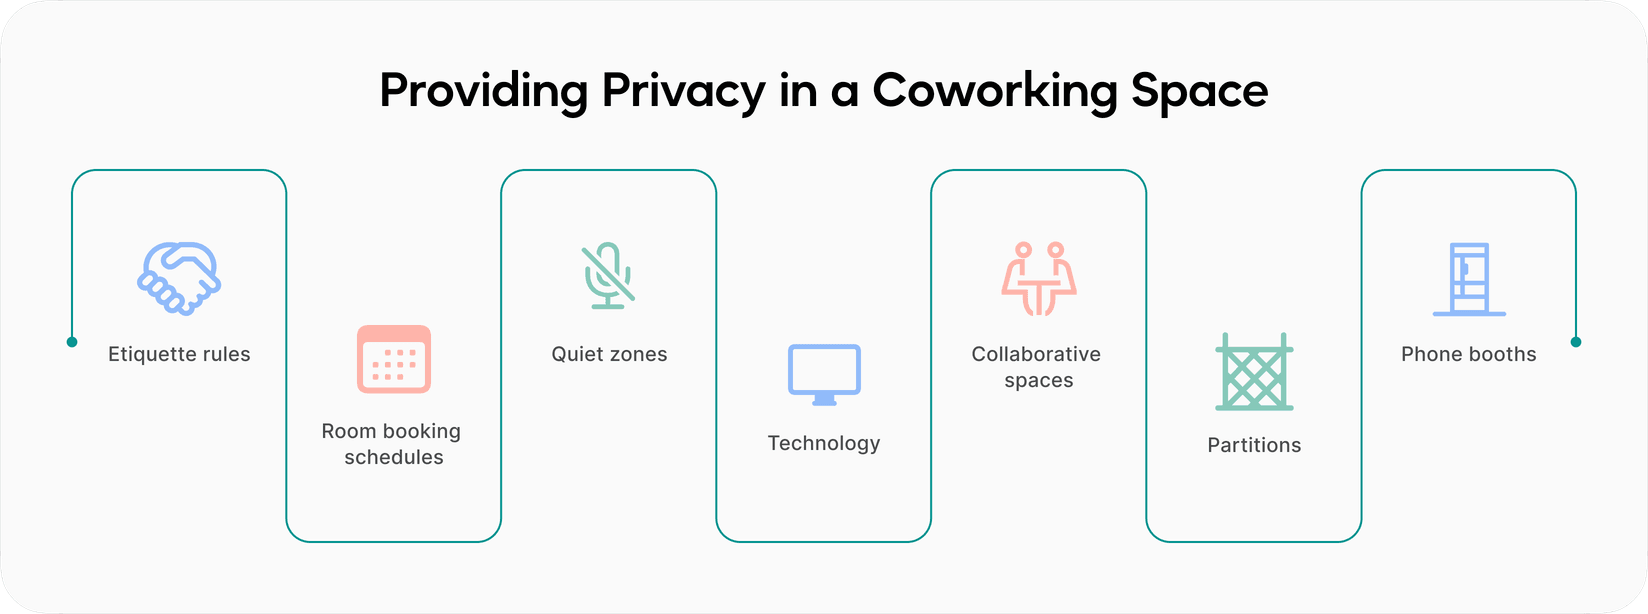 Providing privacy in a coworking space